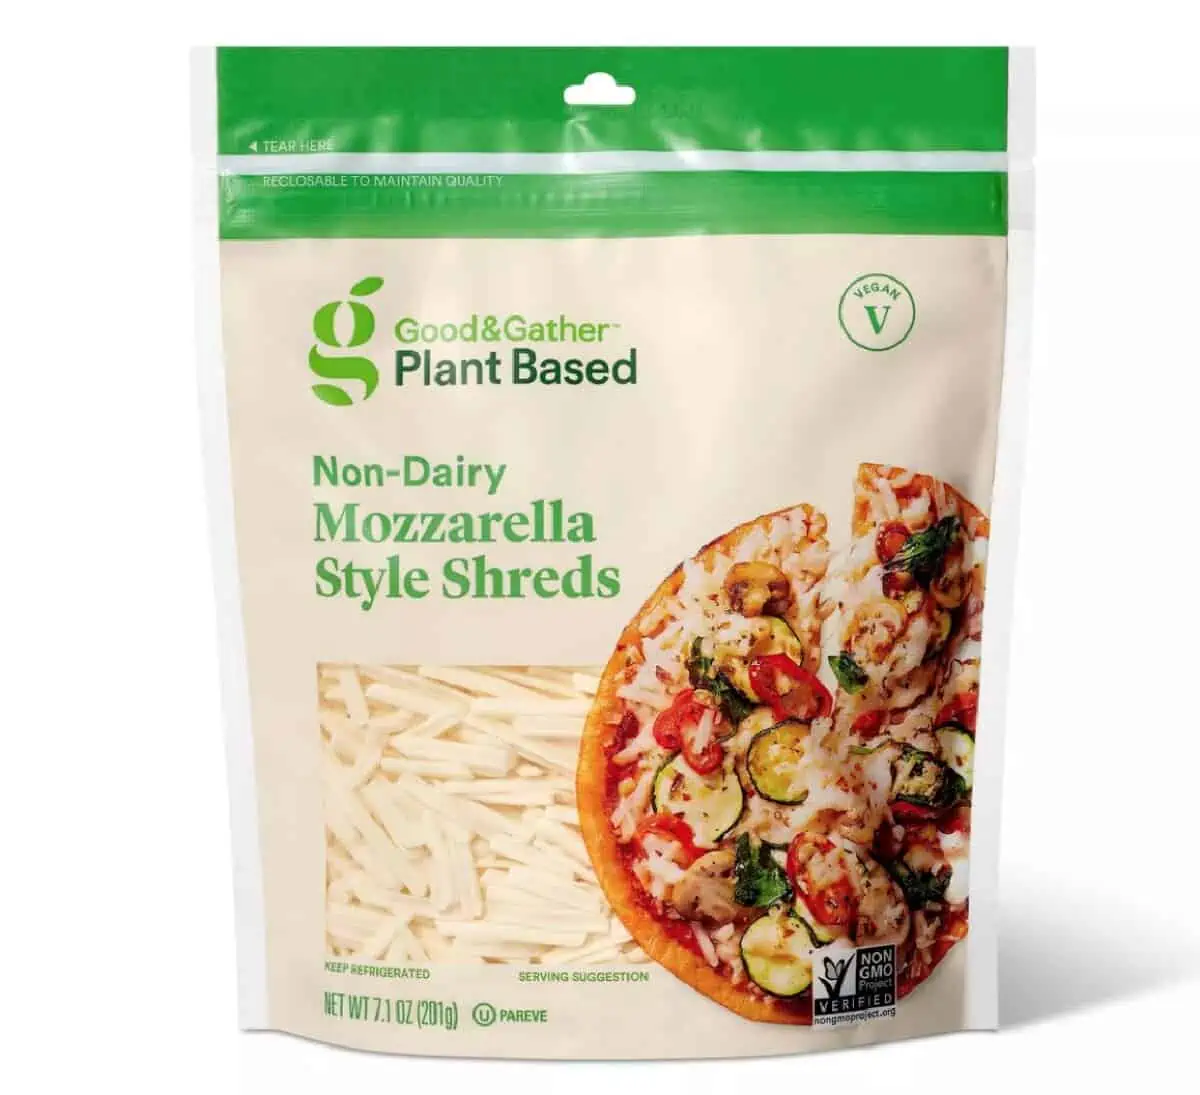 A white and green pouch of Good & Gather Plant-Based, Non-Dairy Mozzarella Style Shreds against a white background.